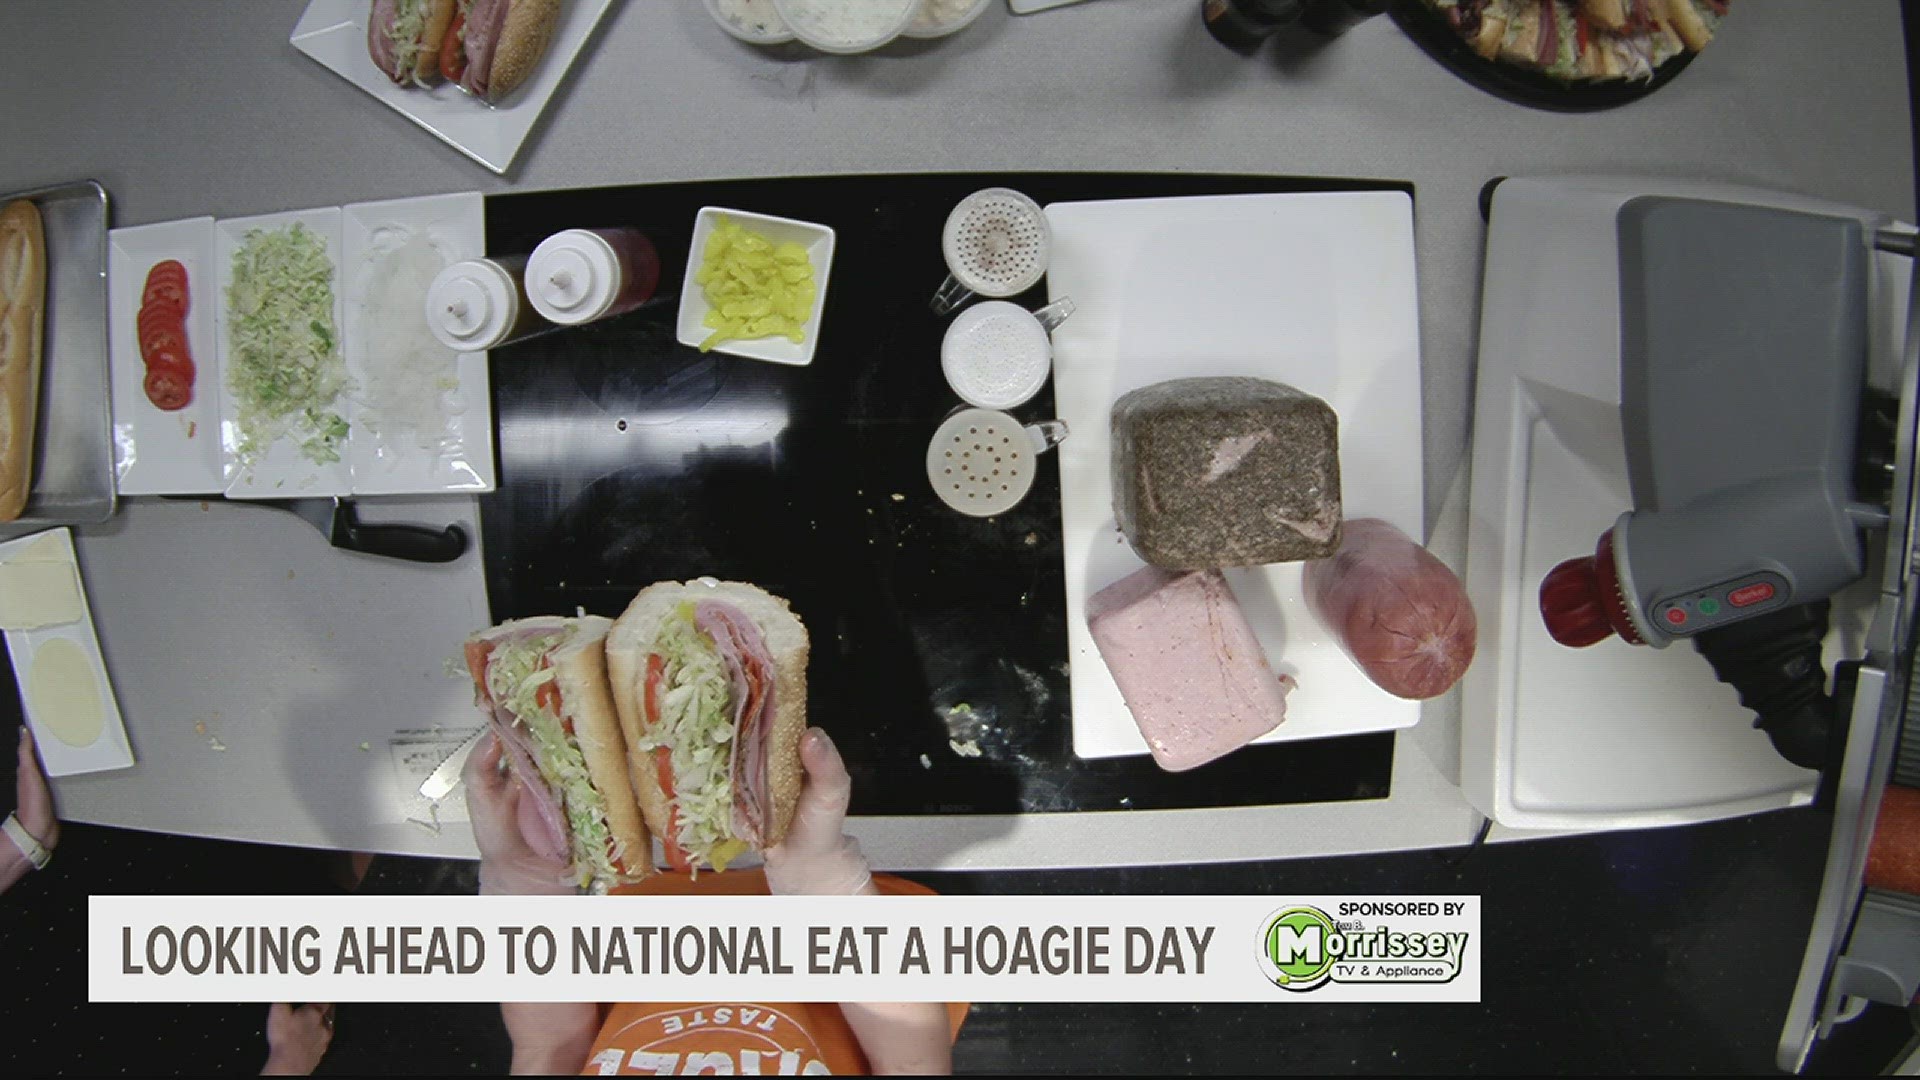 National Eat a Hoagie Day is Sept. 14, and we got inspired with Hoageez in the FOX43 Kitchen.